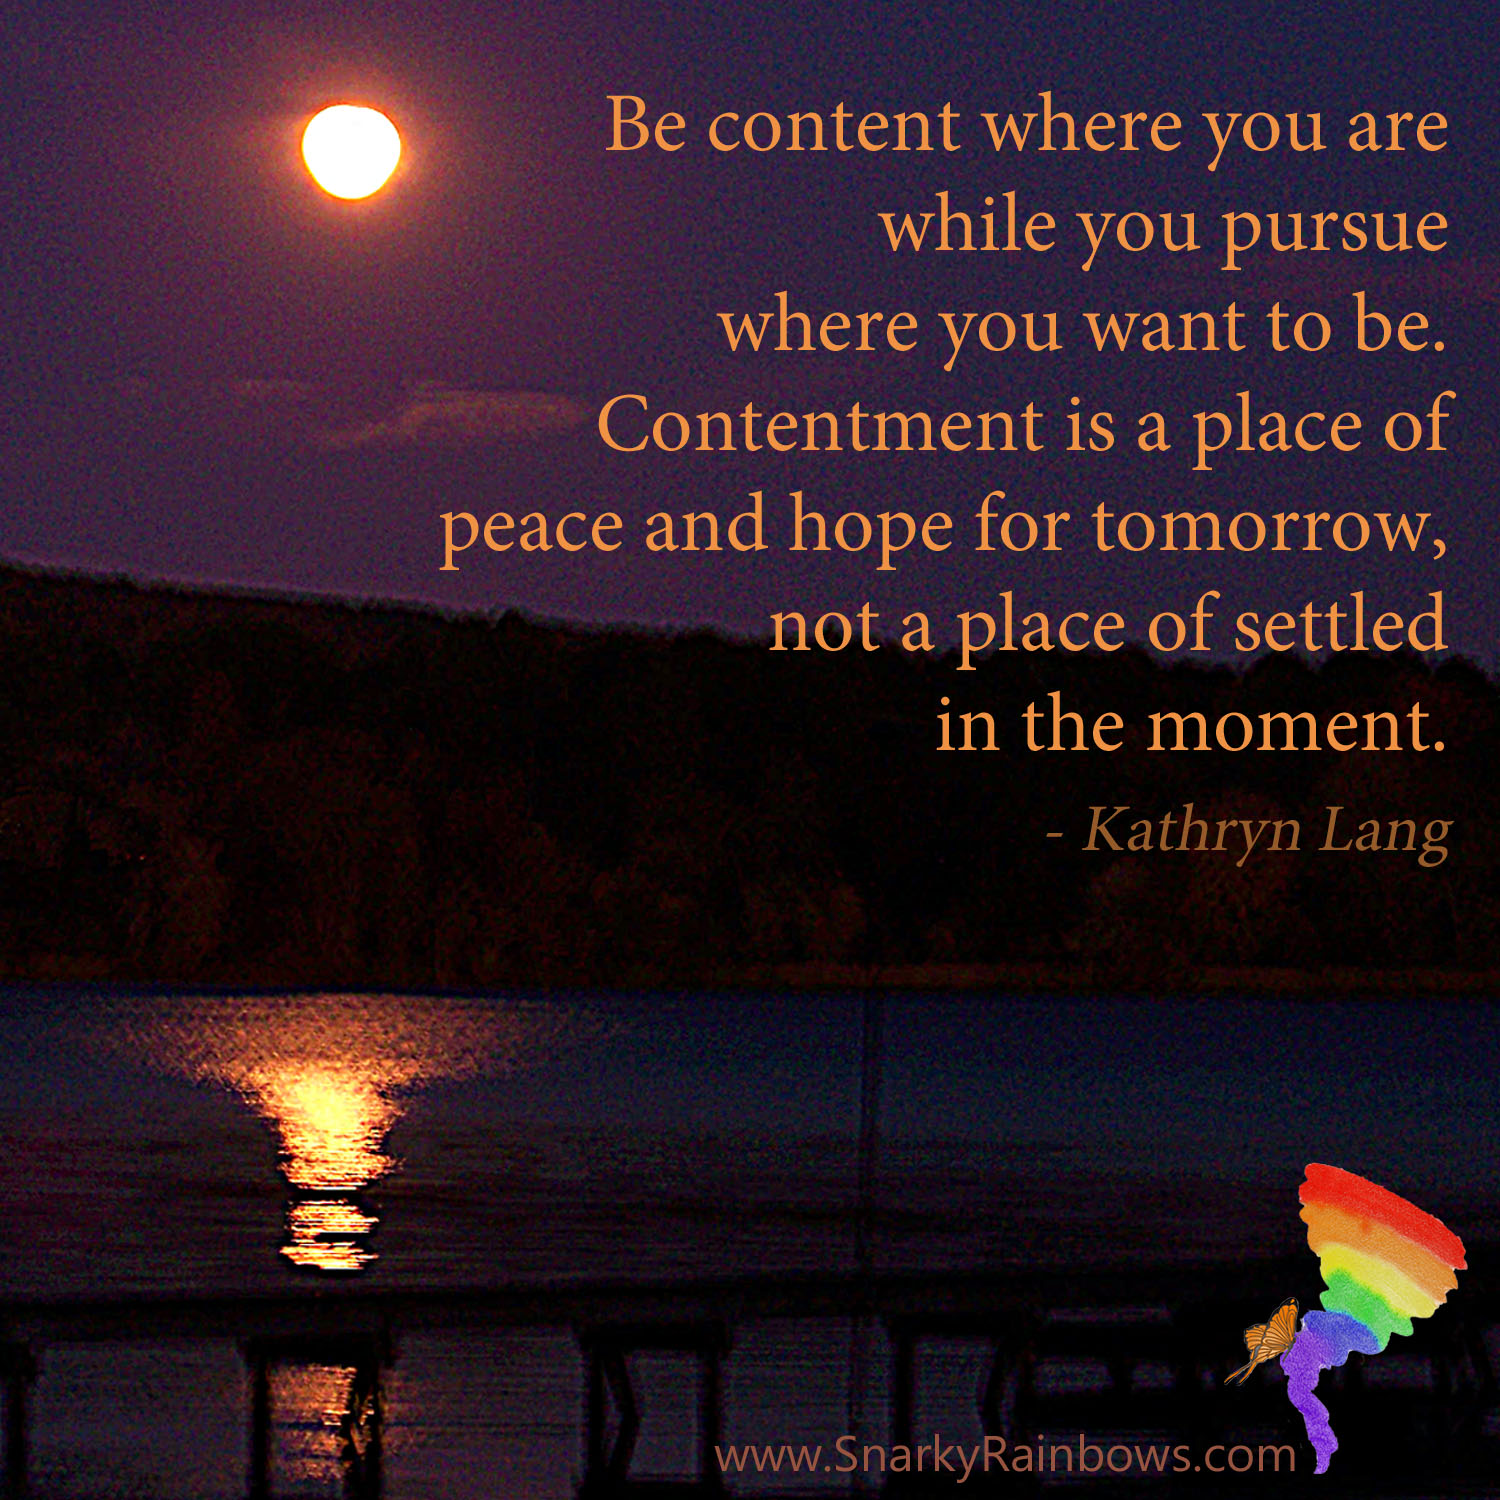 #QuoteoftheDay for November 15 - Find a place of contentment